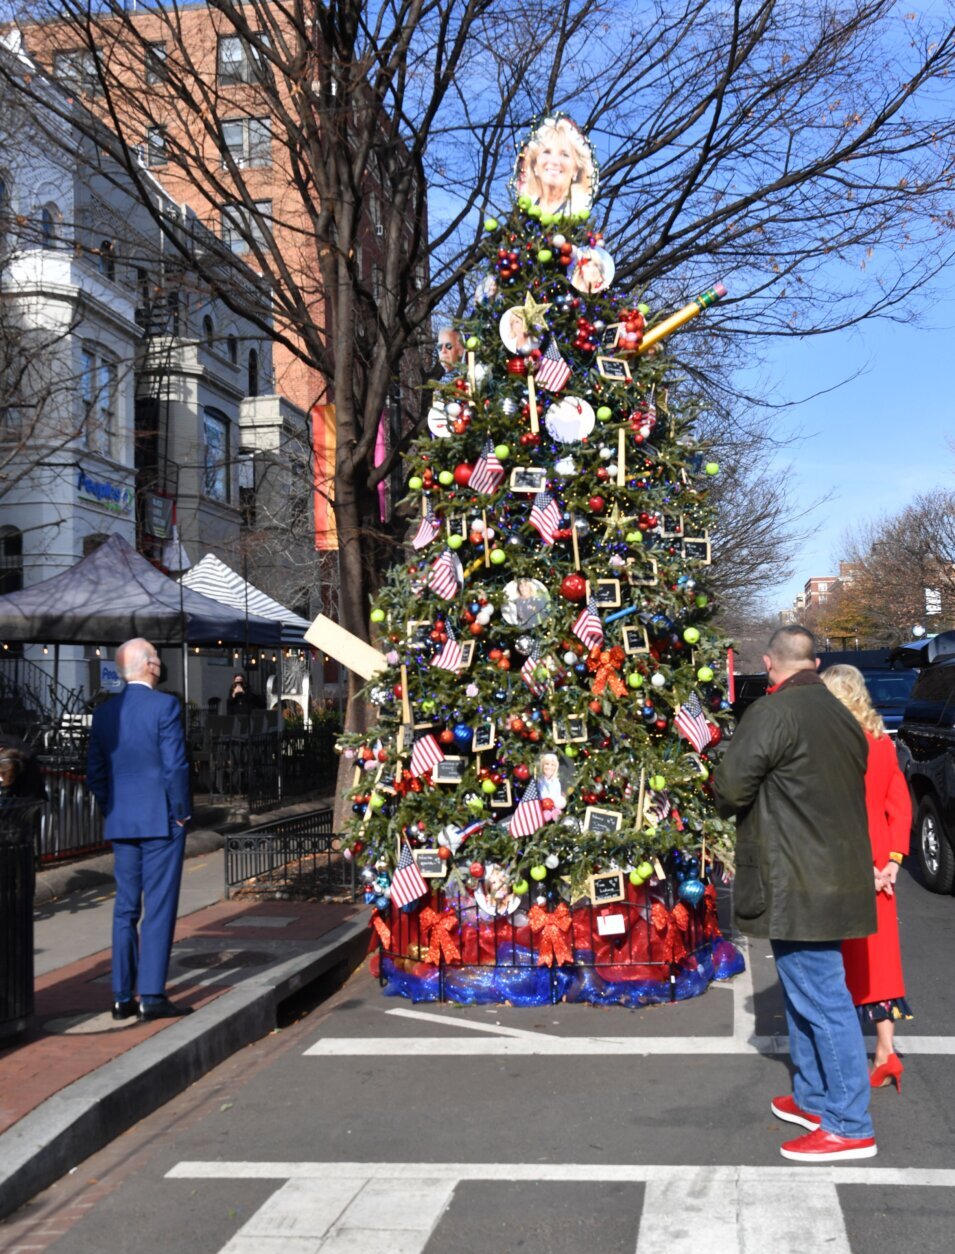 US President Joe Biden visits the Christmas Tree in honor of First Lady Jill Biden outside Floriana Italian Restaurant in Washington, DC, on December 24, 2021. (Photo by Nicholas Kamm / AFP) (Photo by NICHOLAS KAMM/AFP via Getty Images)